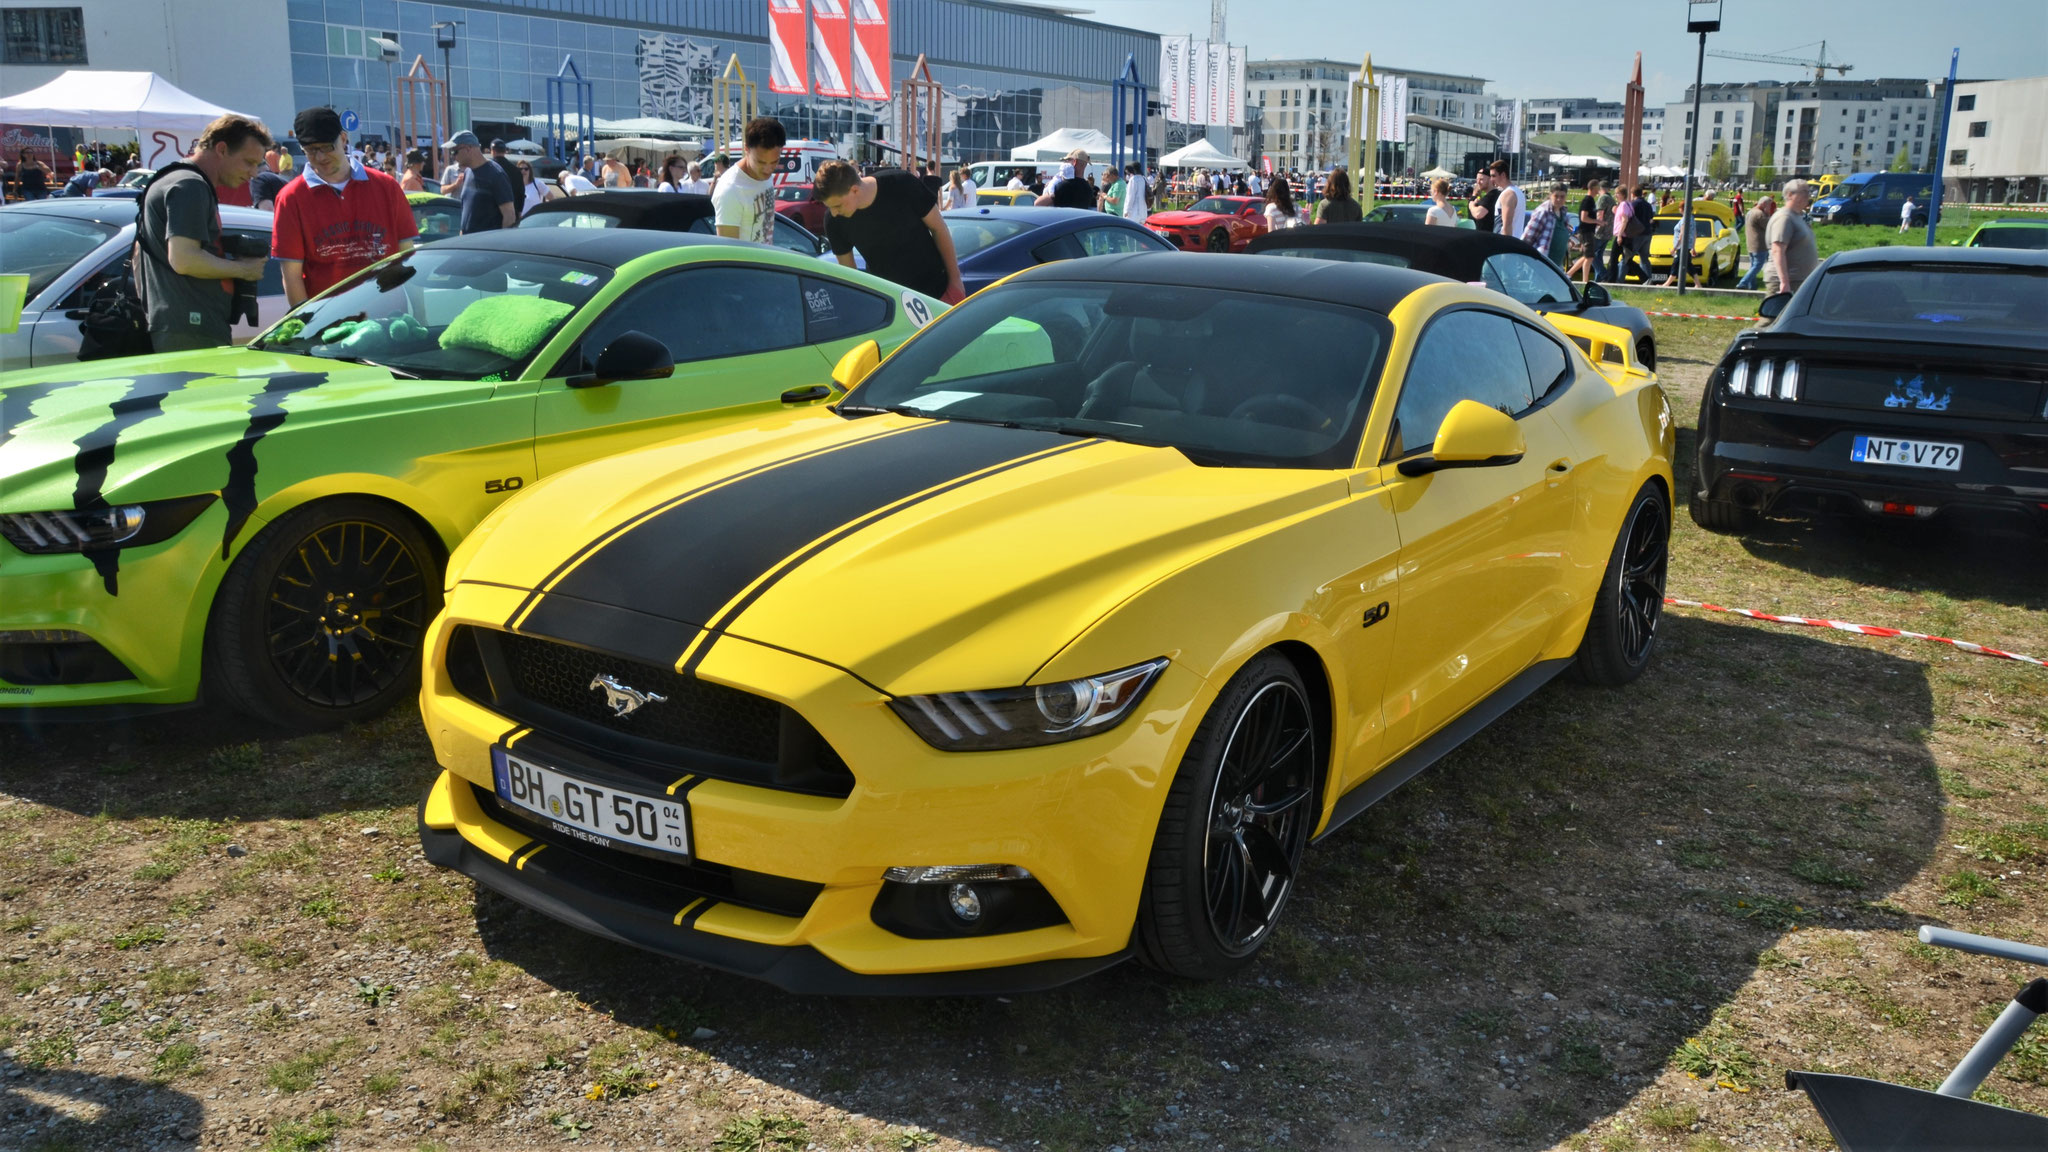 Ford Mustang GT - BH-GT-50